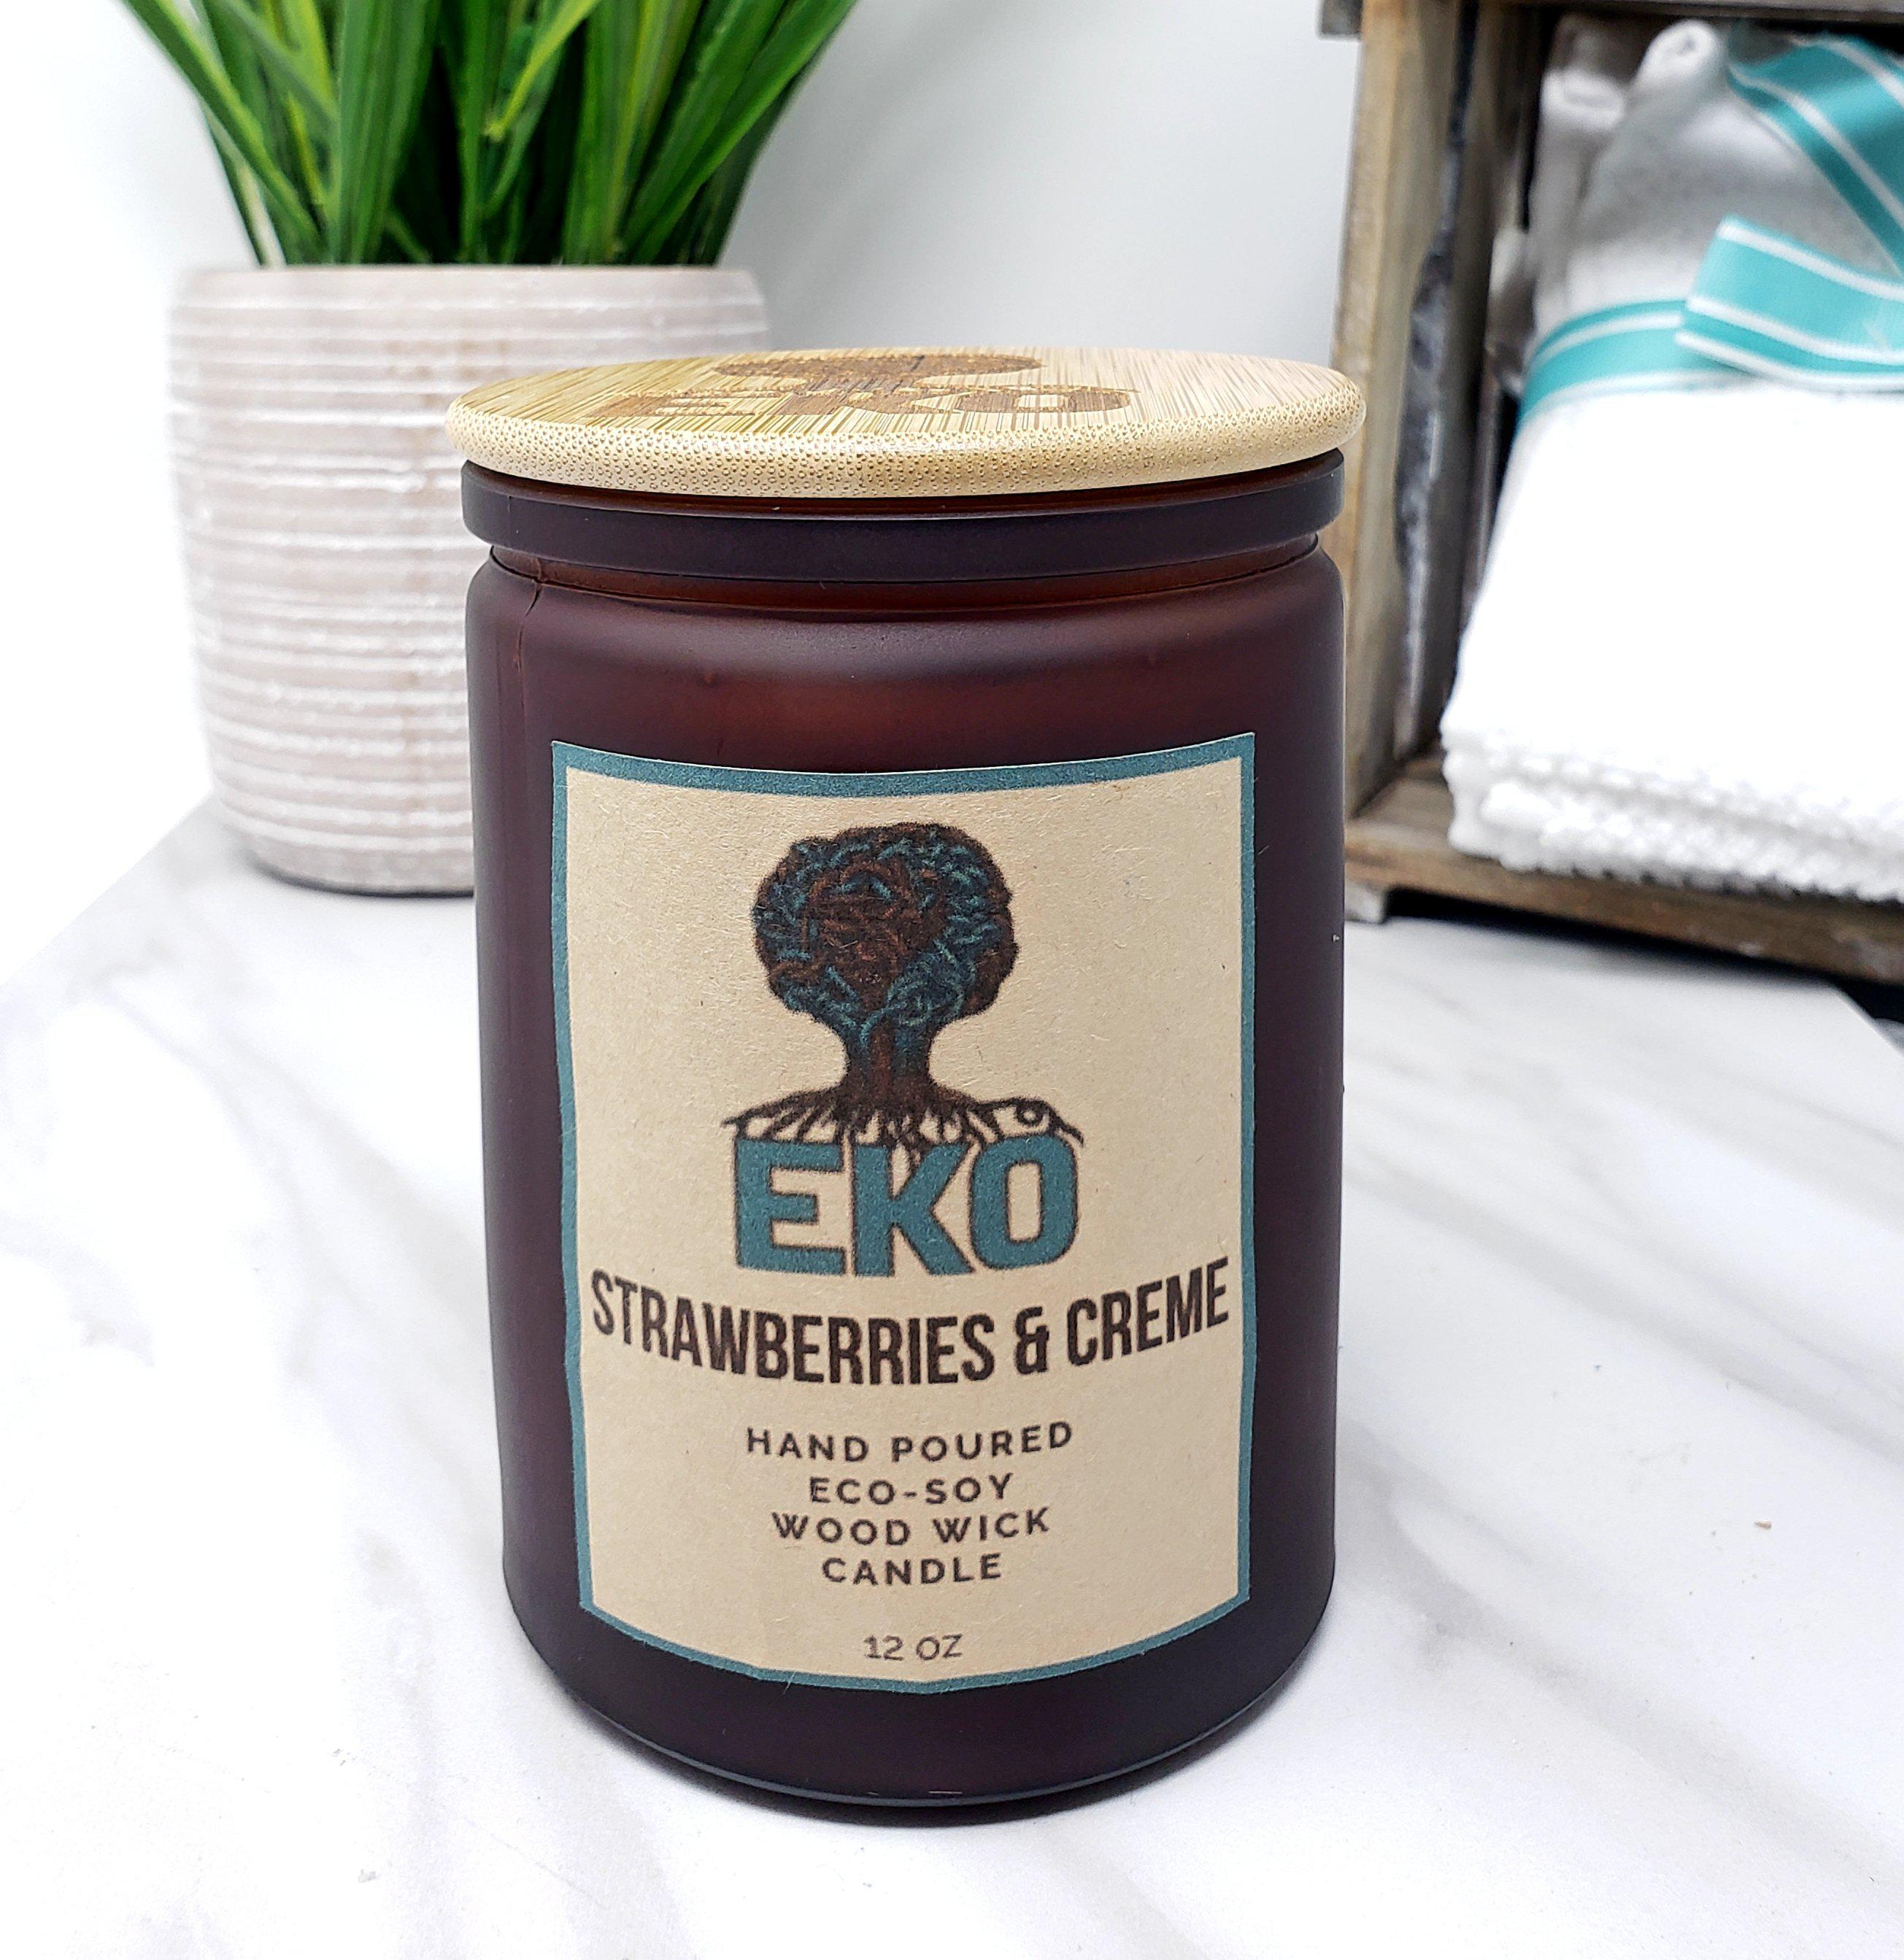 Strawberries & Creme Eco-Soy Candle